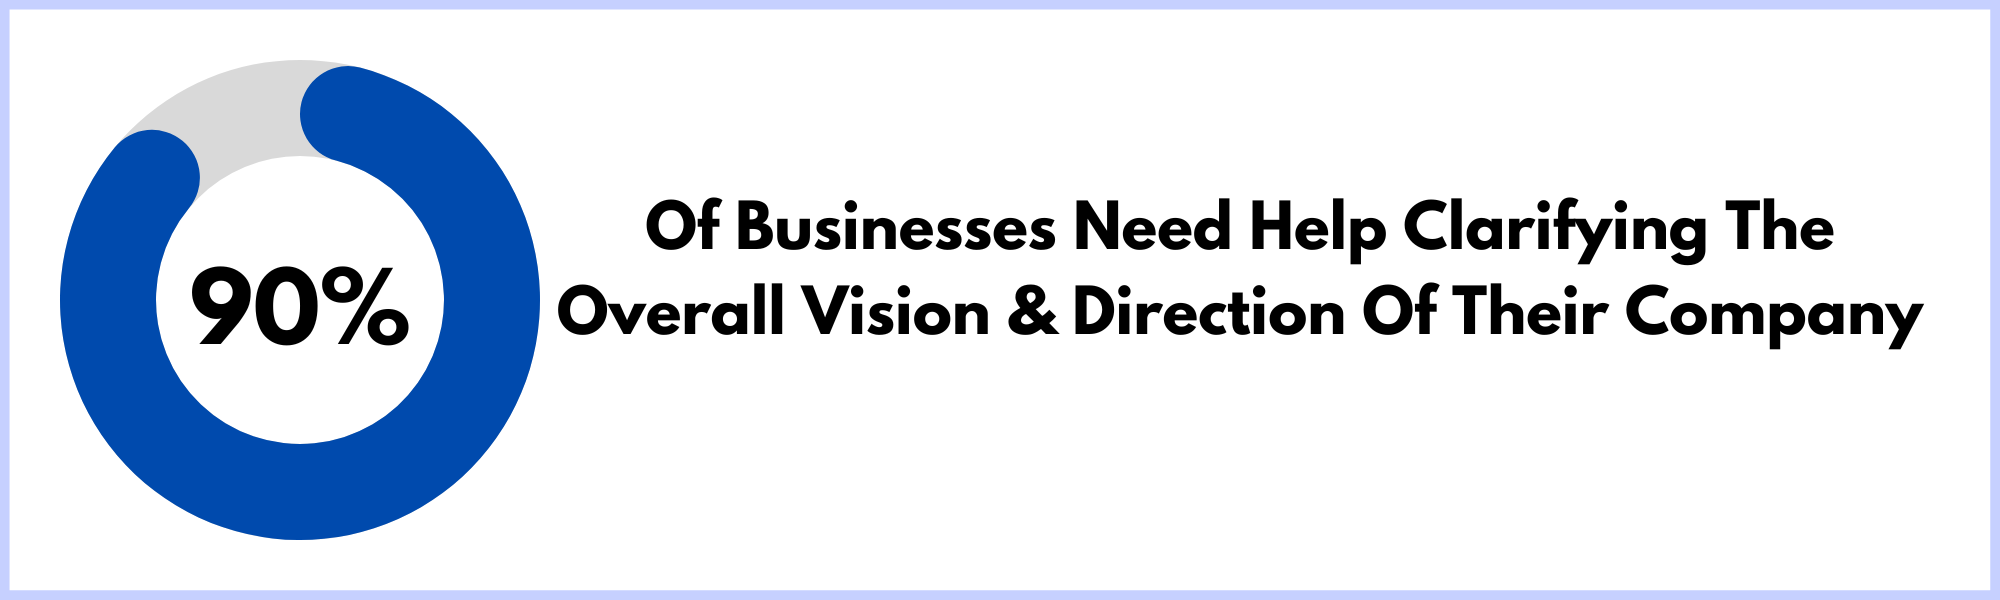 Stat:  90% Of Businesses Need Help Clarifying The Overall Vision & Direction Of Their Company